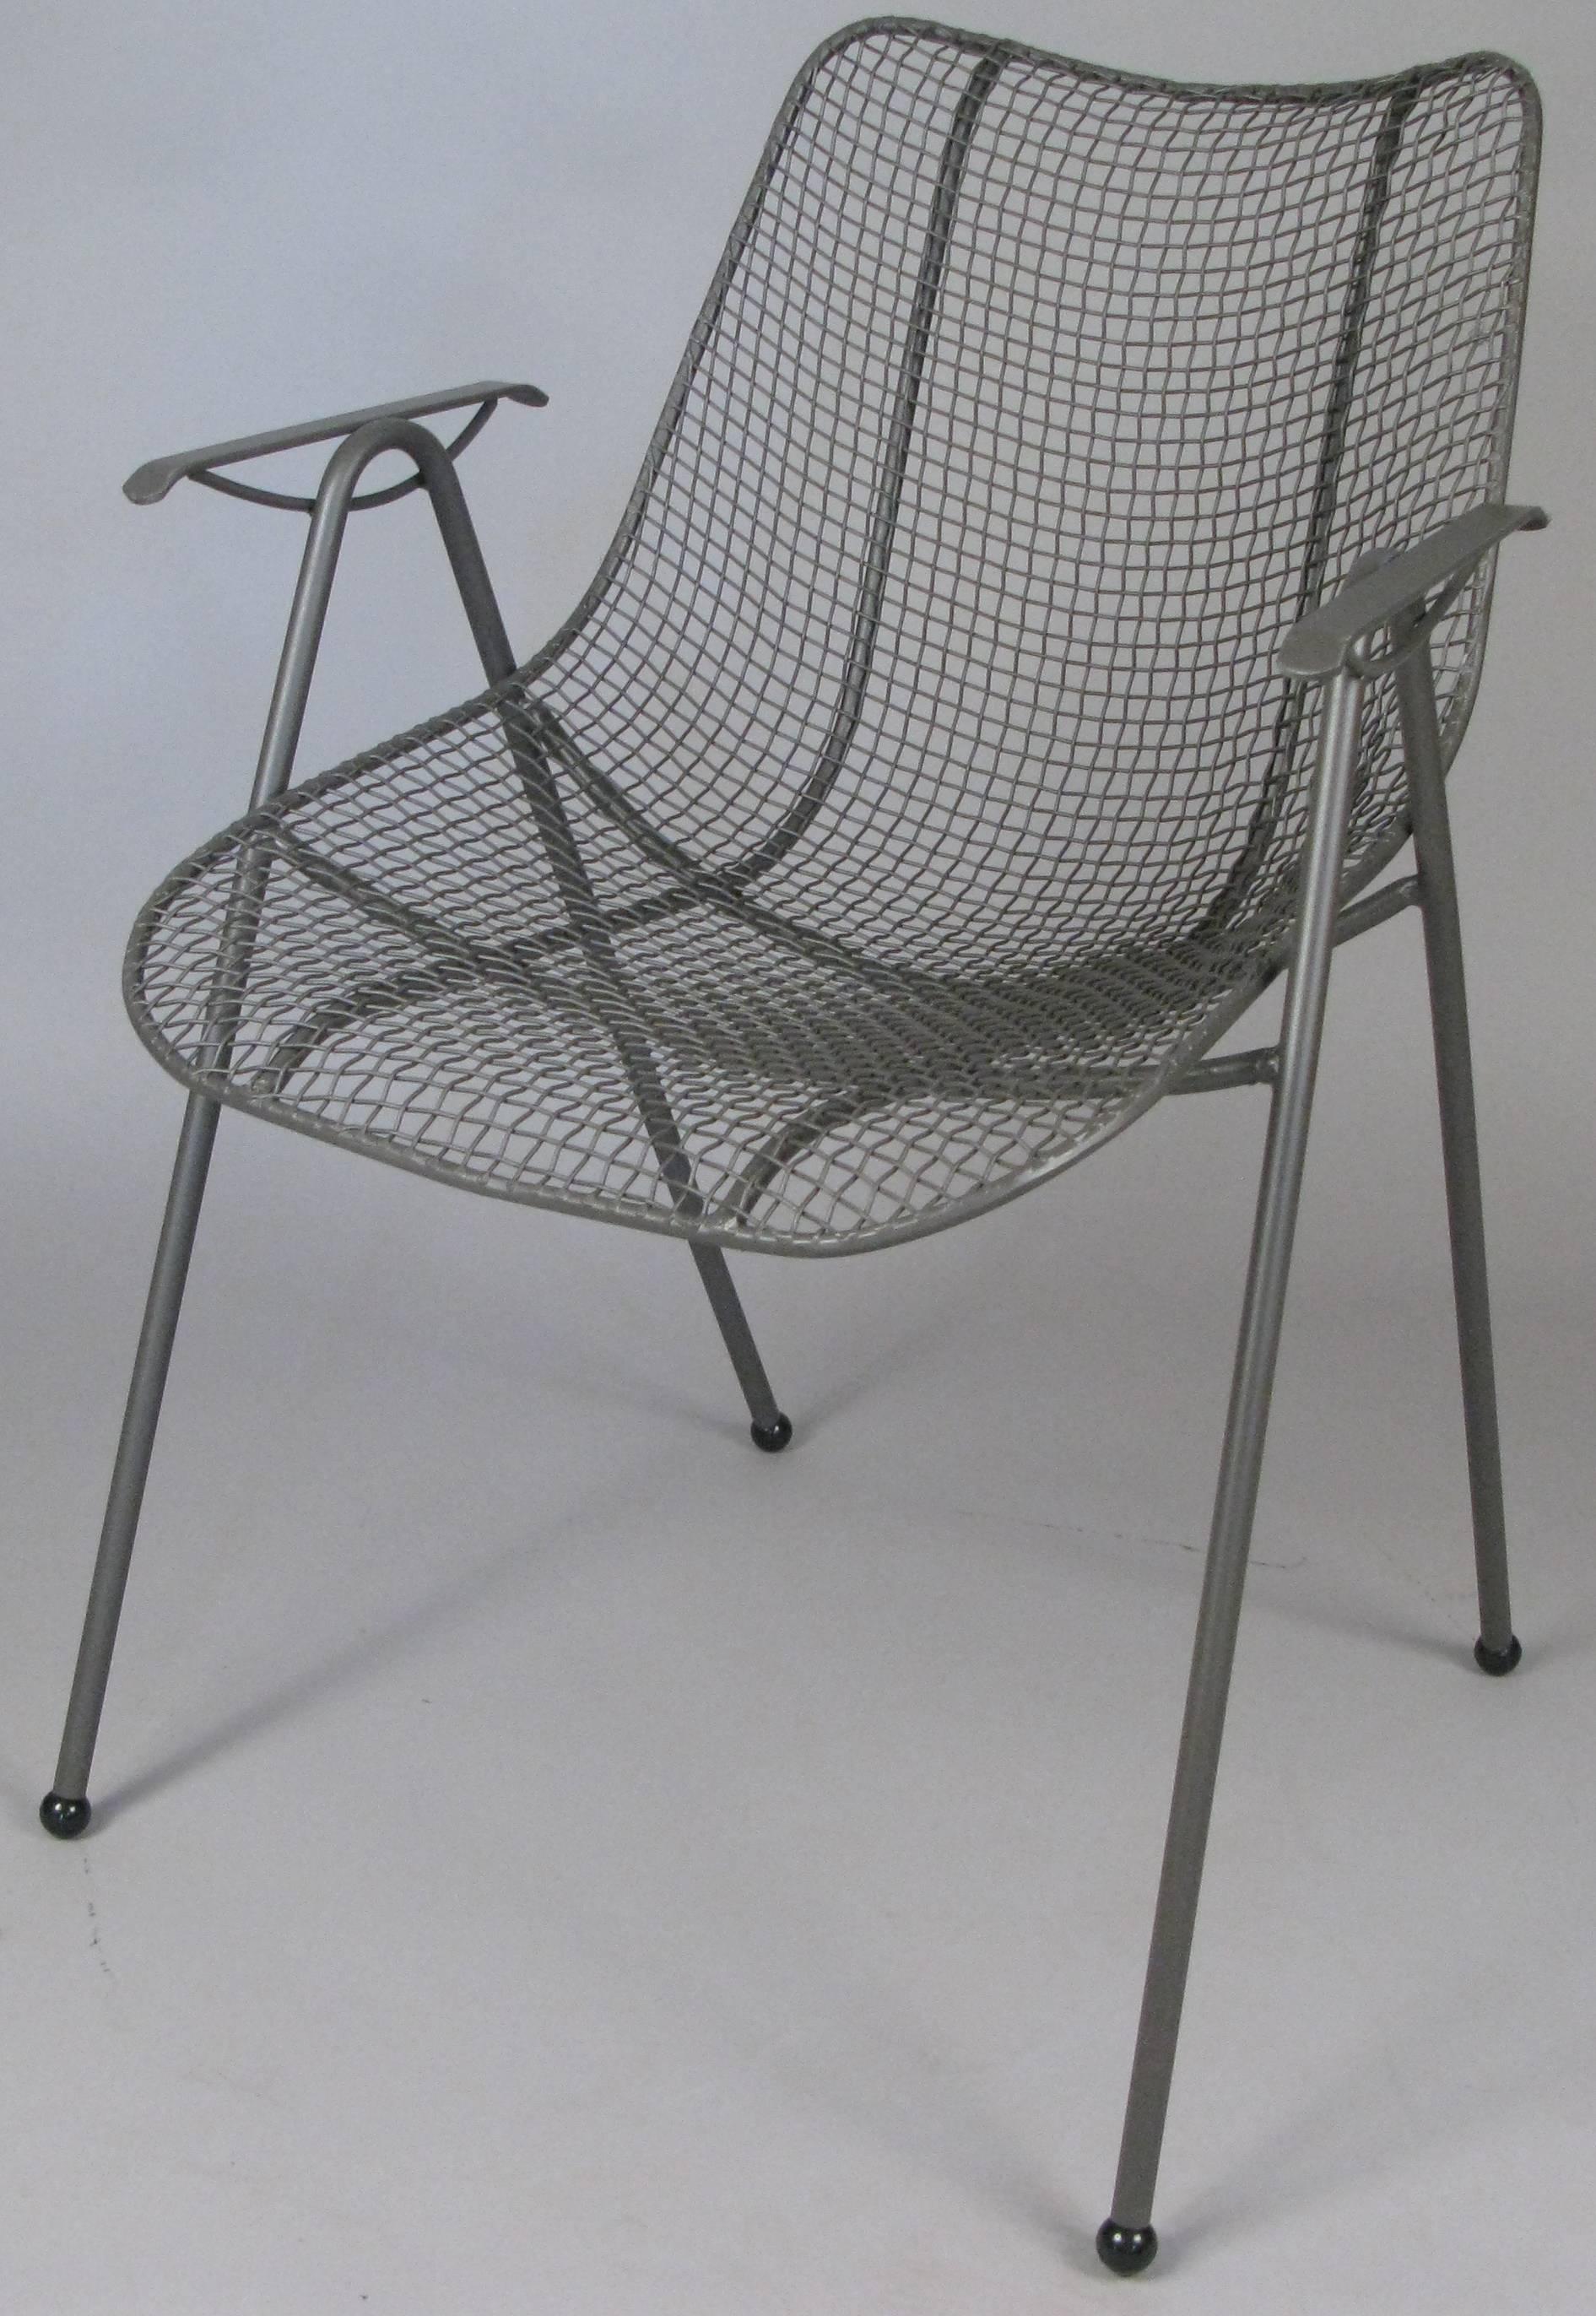 A matched set of eight 1950s wrought iron dining chairs from Russell Woodard's Sculptura collection. With Woodard's signature woven steel mesh seats, all chairs refinished in greige.